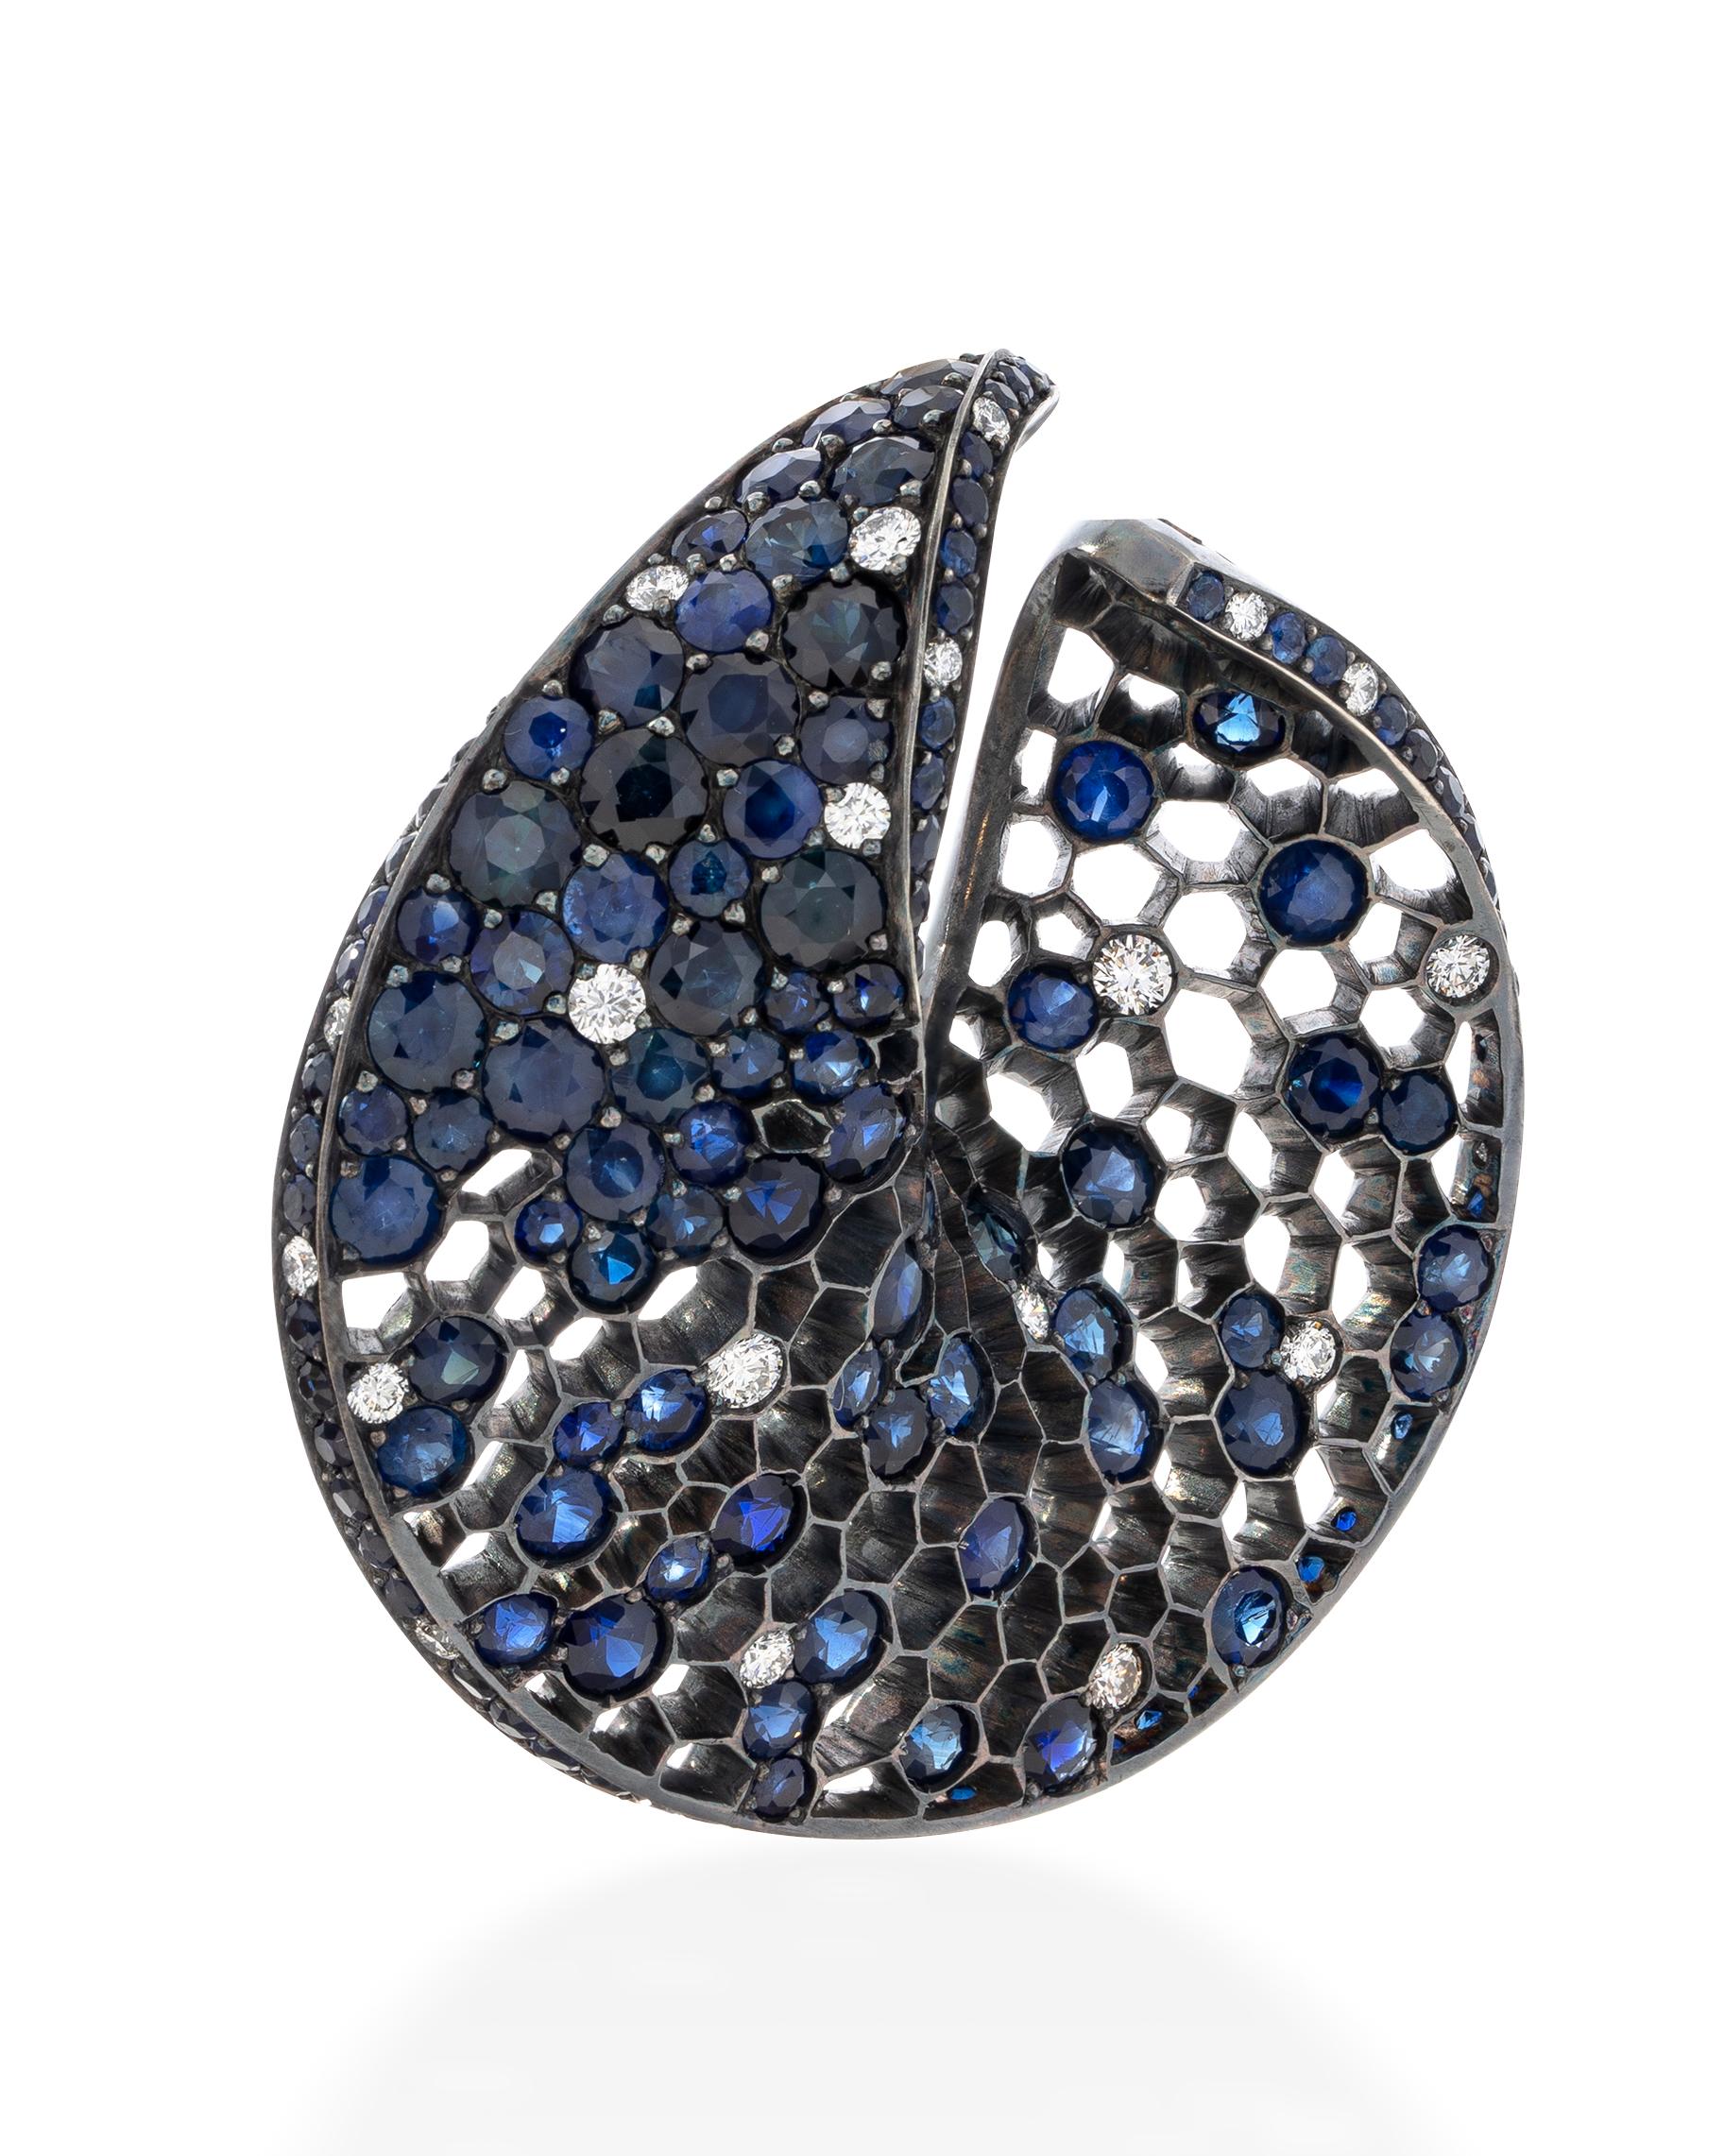 Brilliant Cut Eternity night earrings, Ceylon sapphires, diamonds, 18K gold and silver For Sale